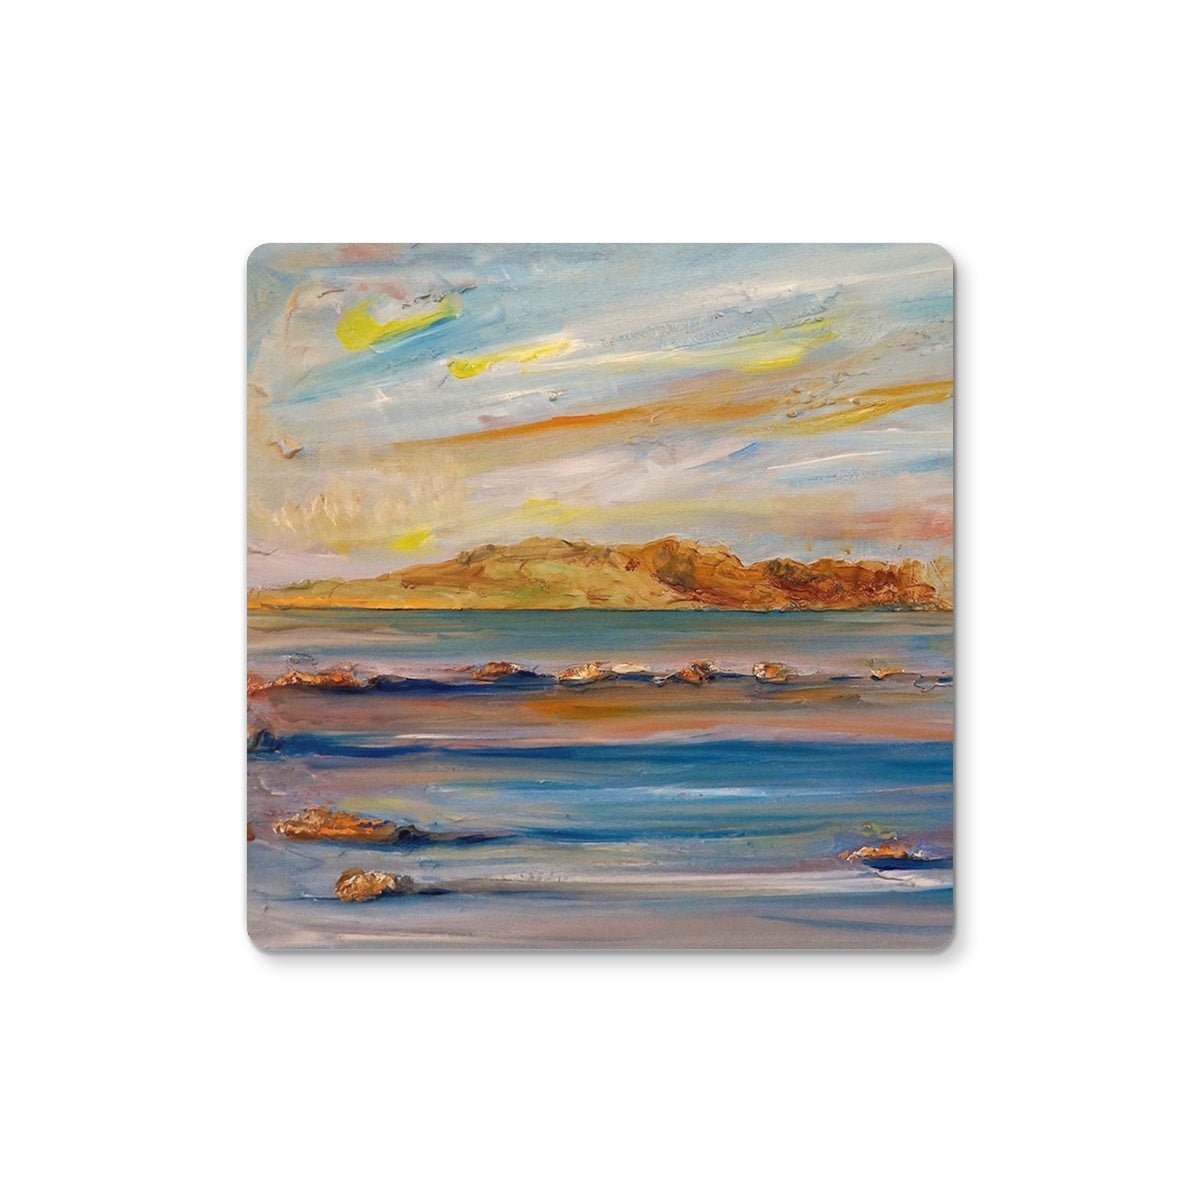 Tiree Dawn Art Gifts Coaster-Coasters-Hebridean Islands Art Gallery-6 Coasters-Paintings, Prints, Homeware, Art Gifts From Scotland By Scottish Artist Kevin Hunter